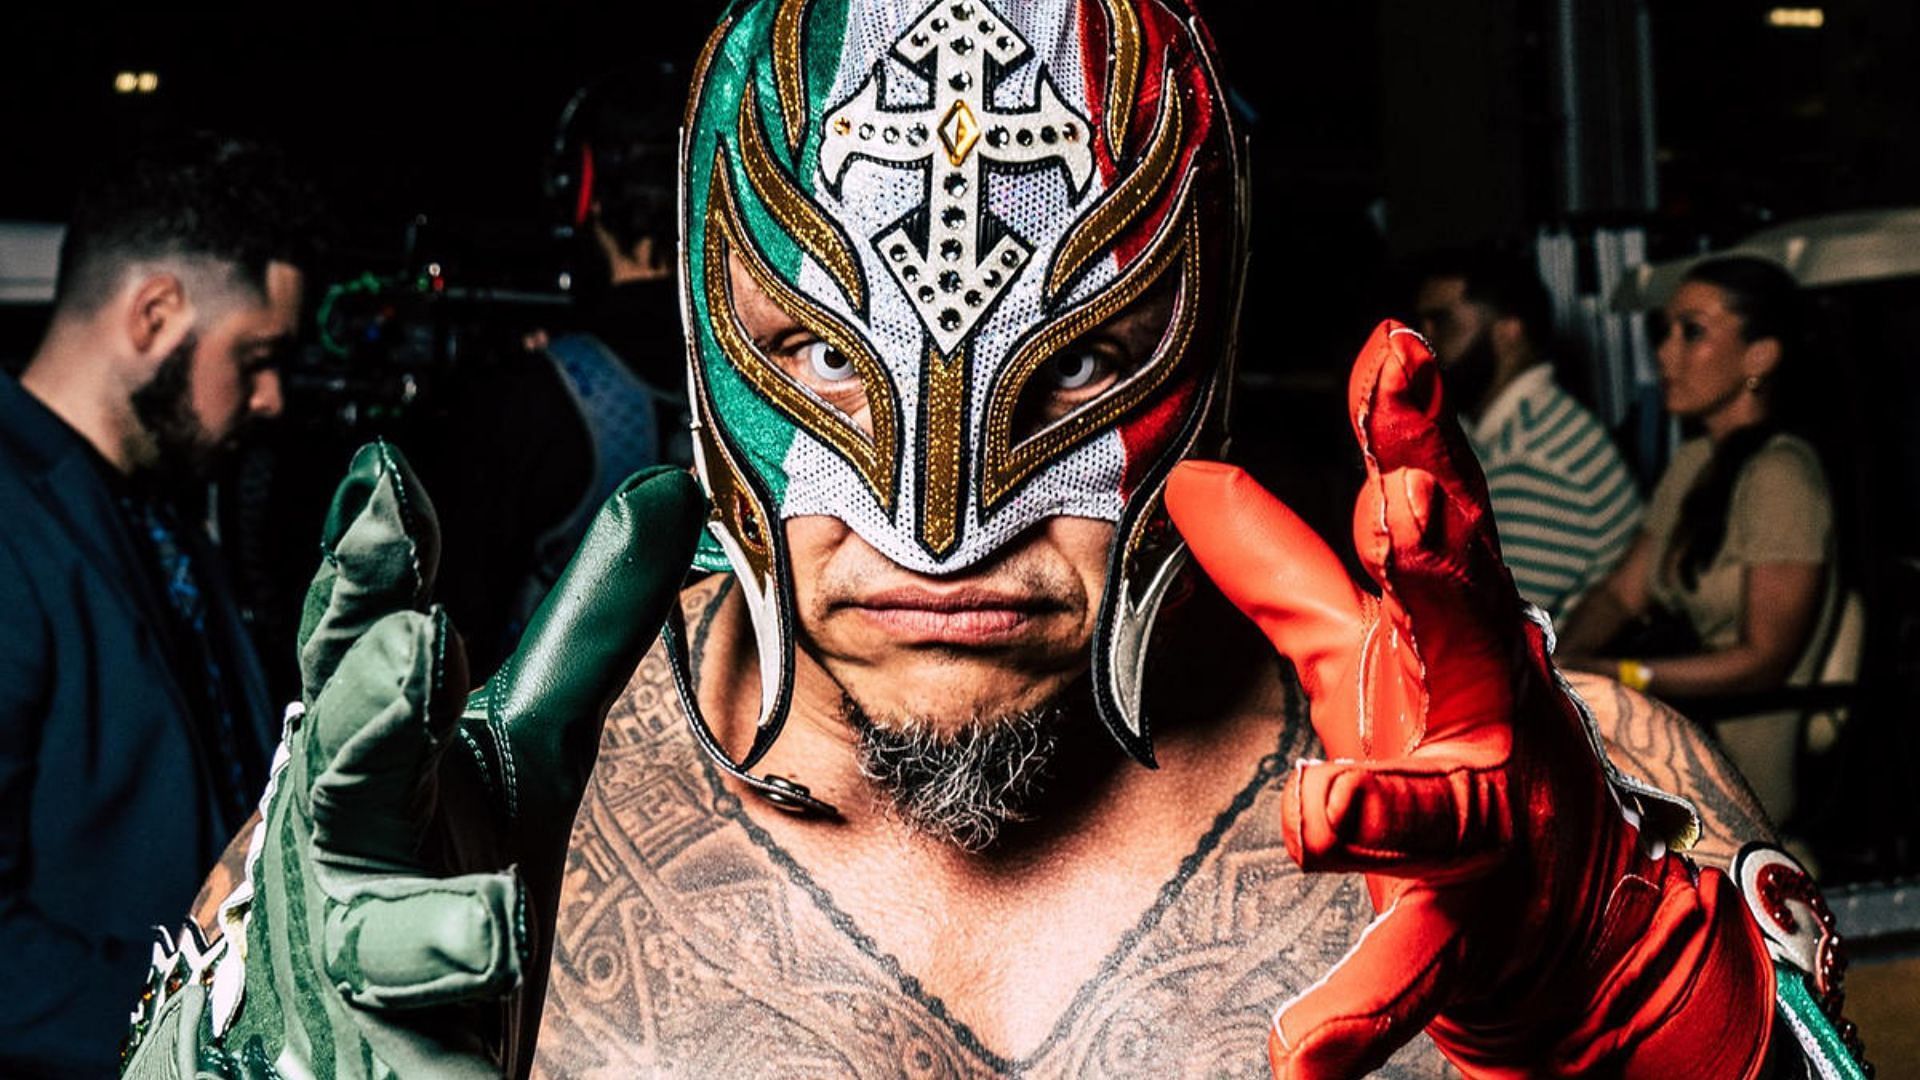 Rey Mysterio is a SmackDown Superstar